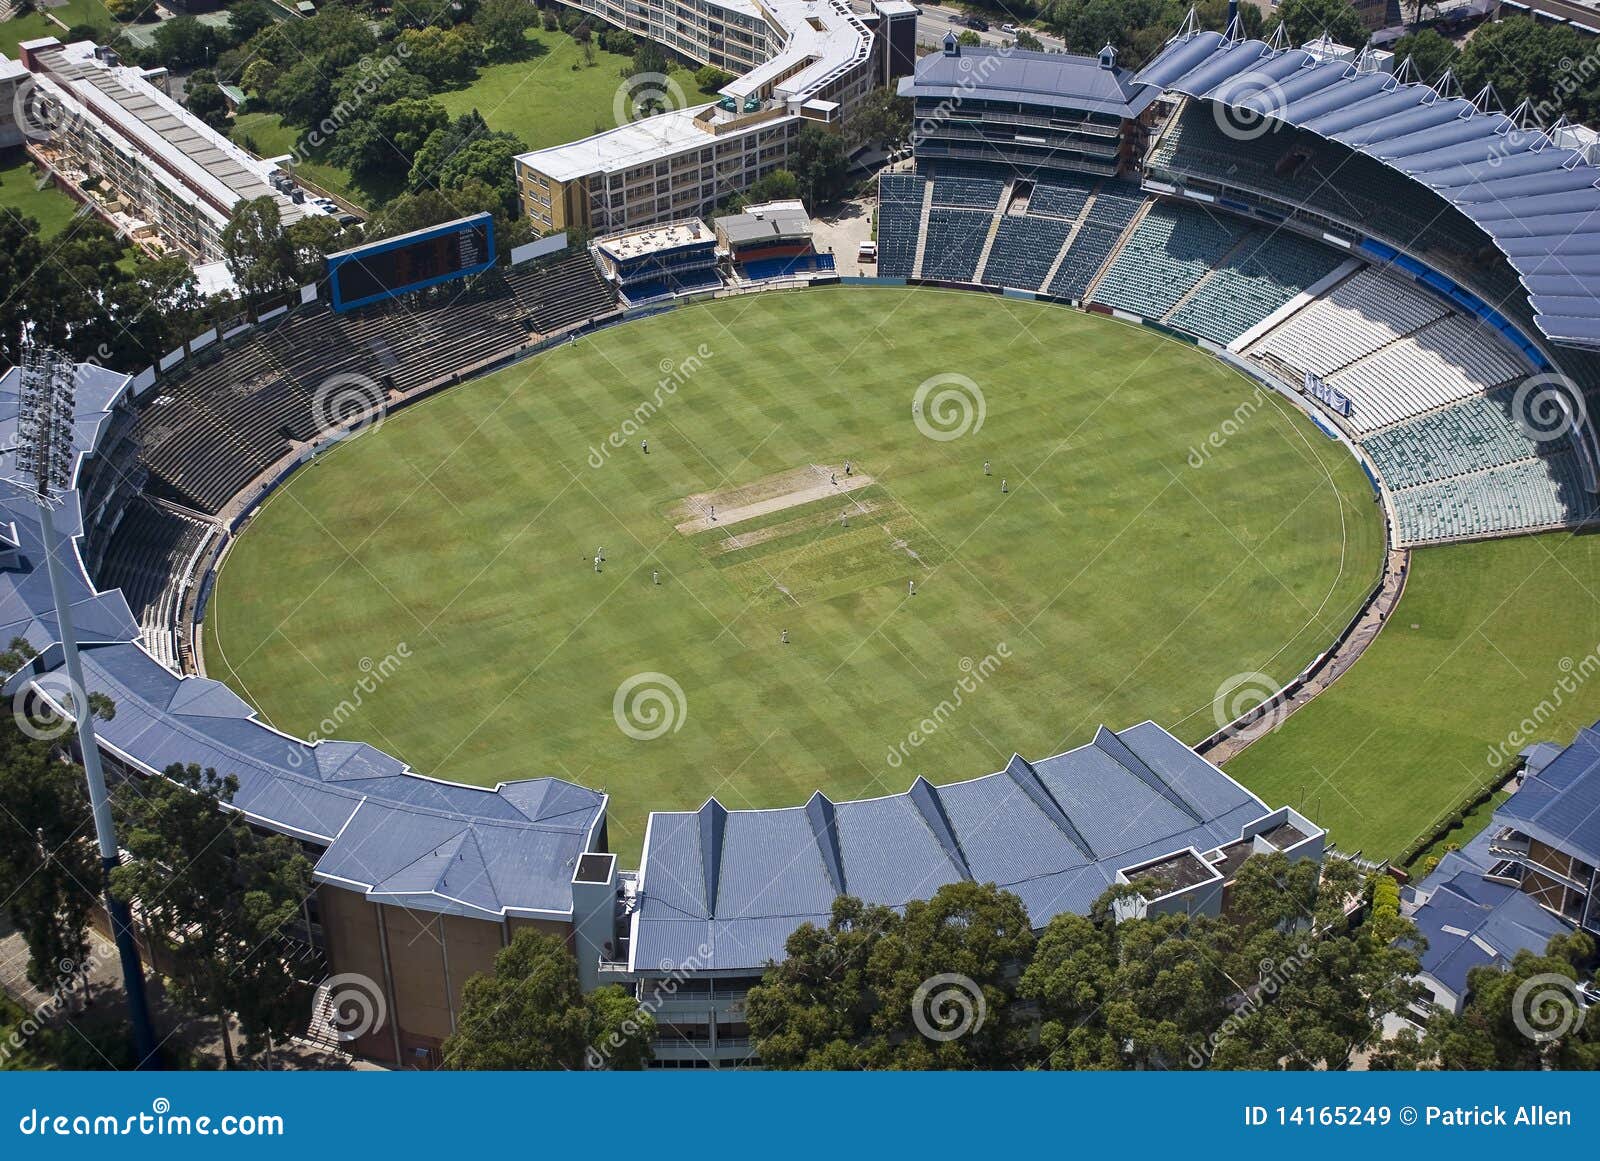 Wanderers Cricket Stadium Aerial View Stock Image Image Of Architecture Board 14165249